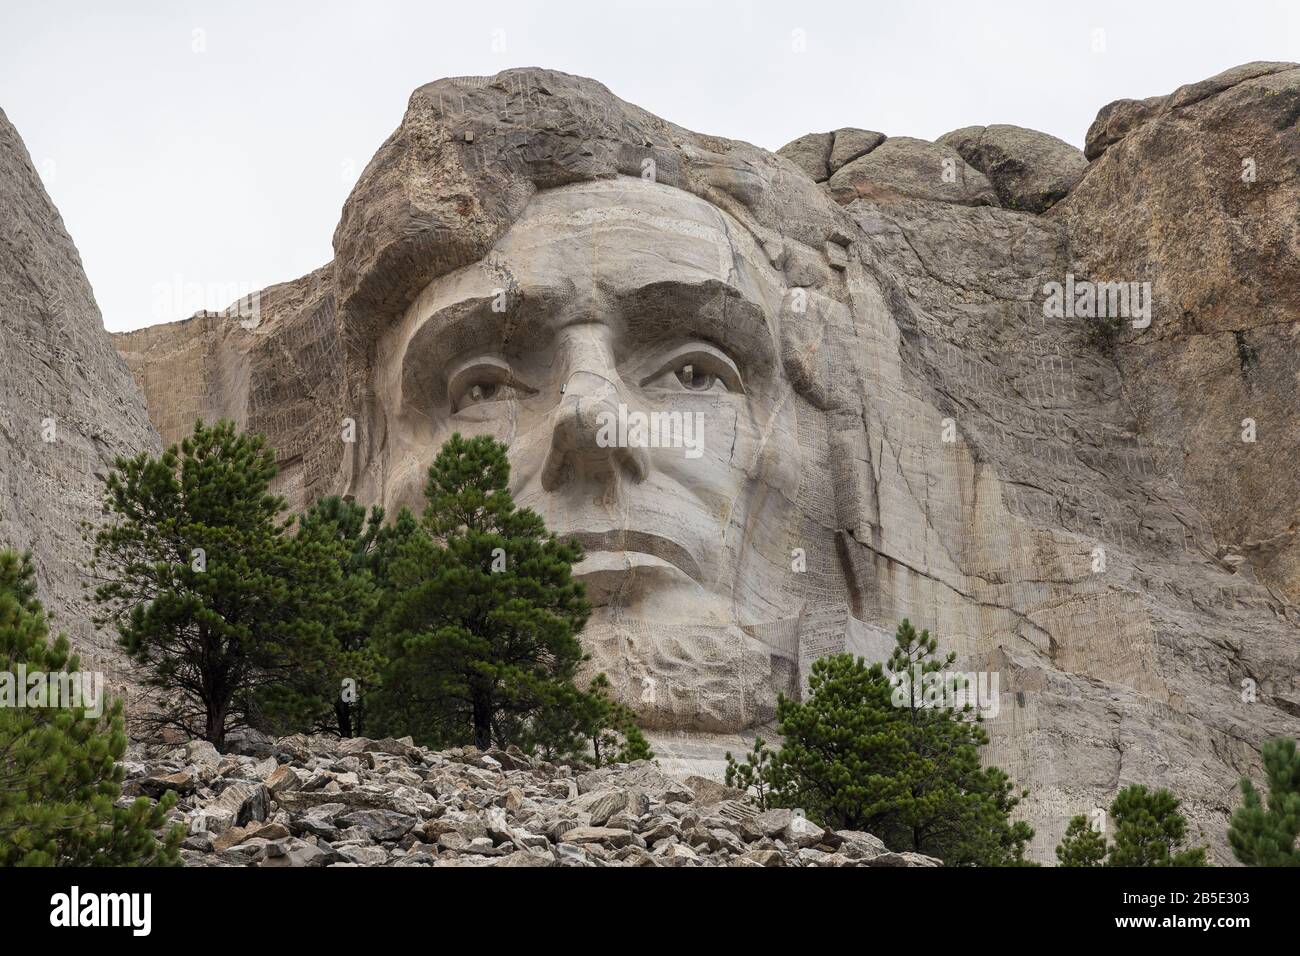 The face of Abraham Lincoln carved in rock at Mt. Rushmore in South Dakota. Stock Photo